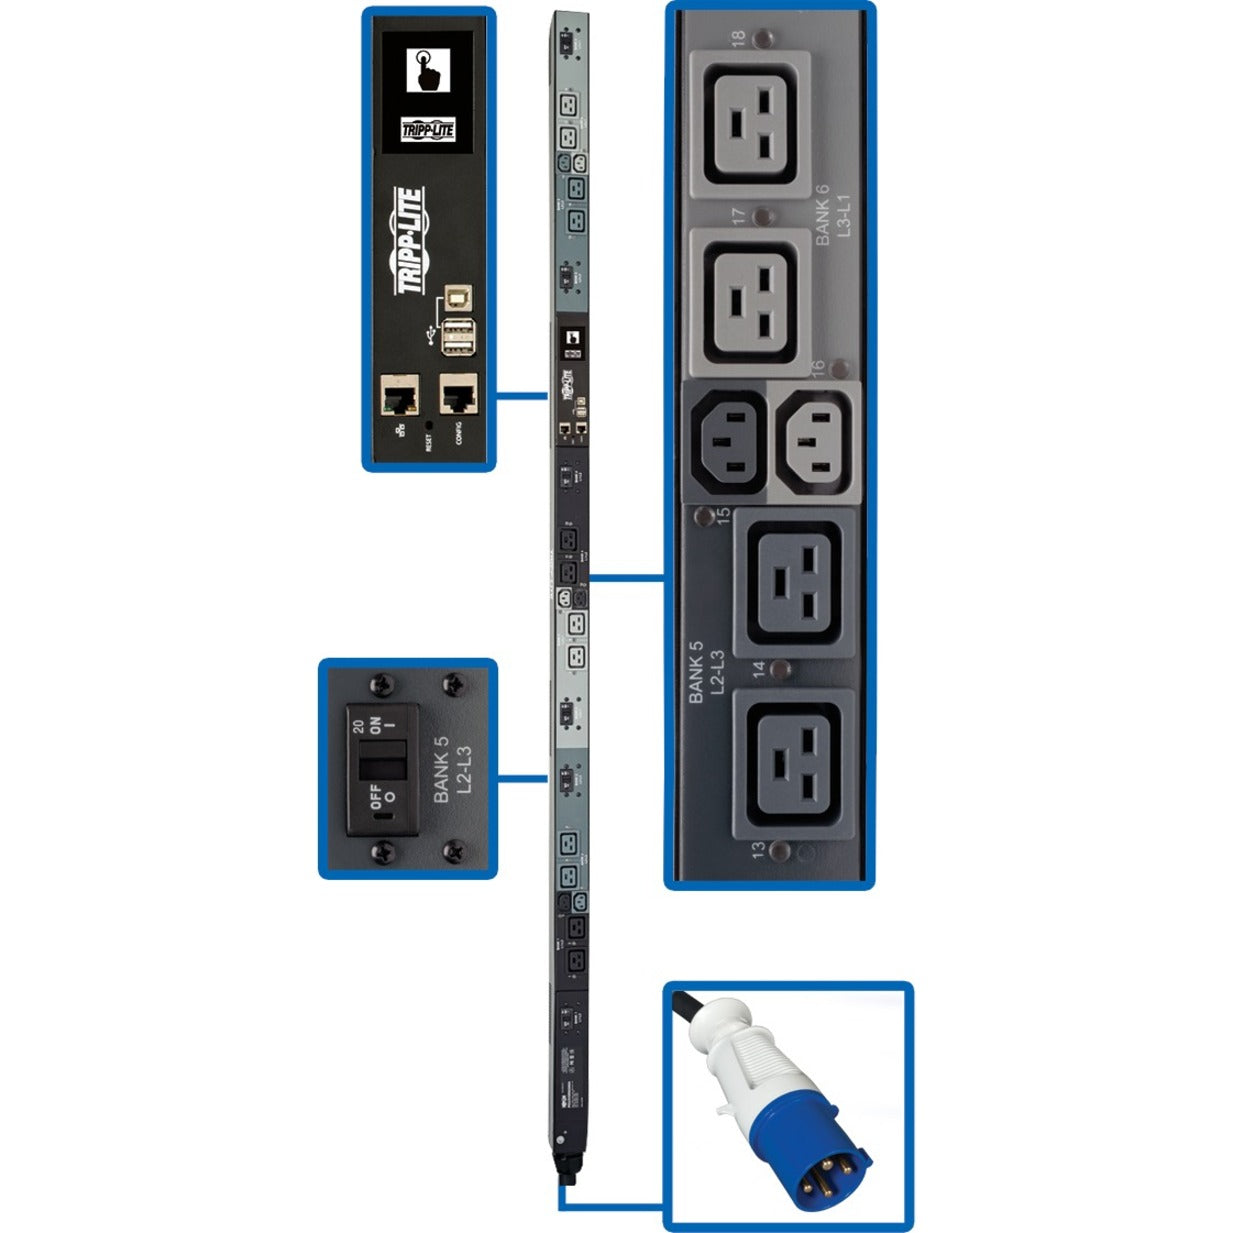 Tripp Lite PDU3EVSR6G60A SWITCHED PDU 16.2KW 3-PHASE, 18-Outlet PDU, Monitored, Overload Protection